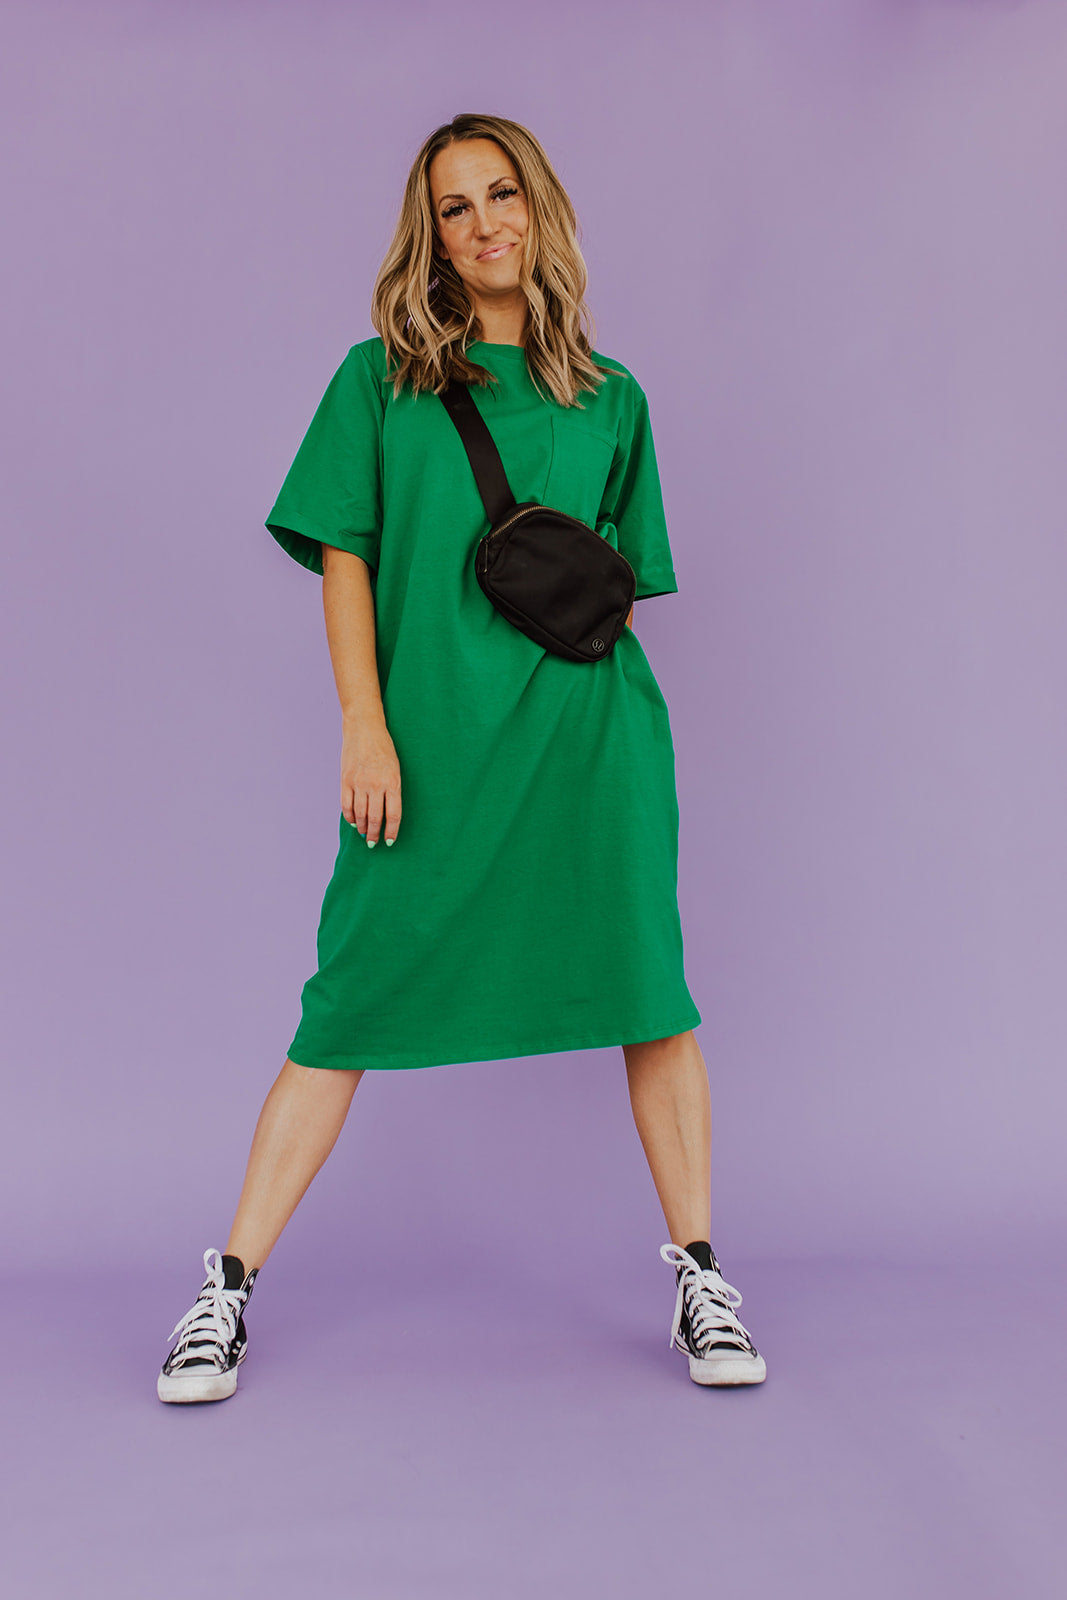 THE EASY IT T-SHIRT DRESS BY PINK DESERT IN KELLY GREEN – Pink